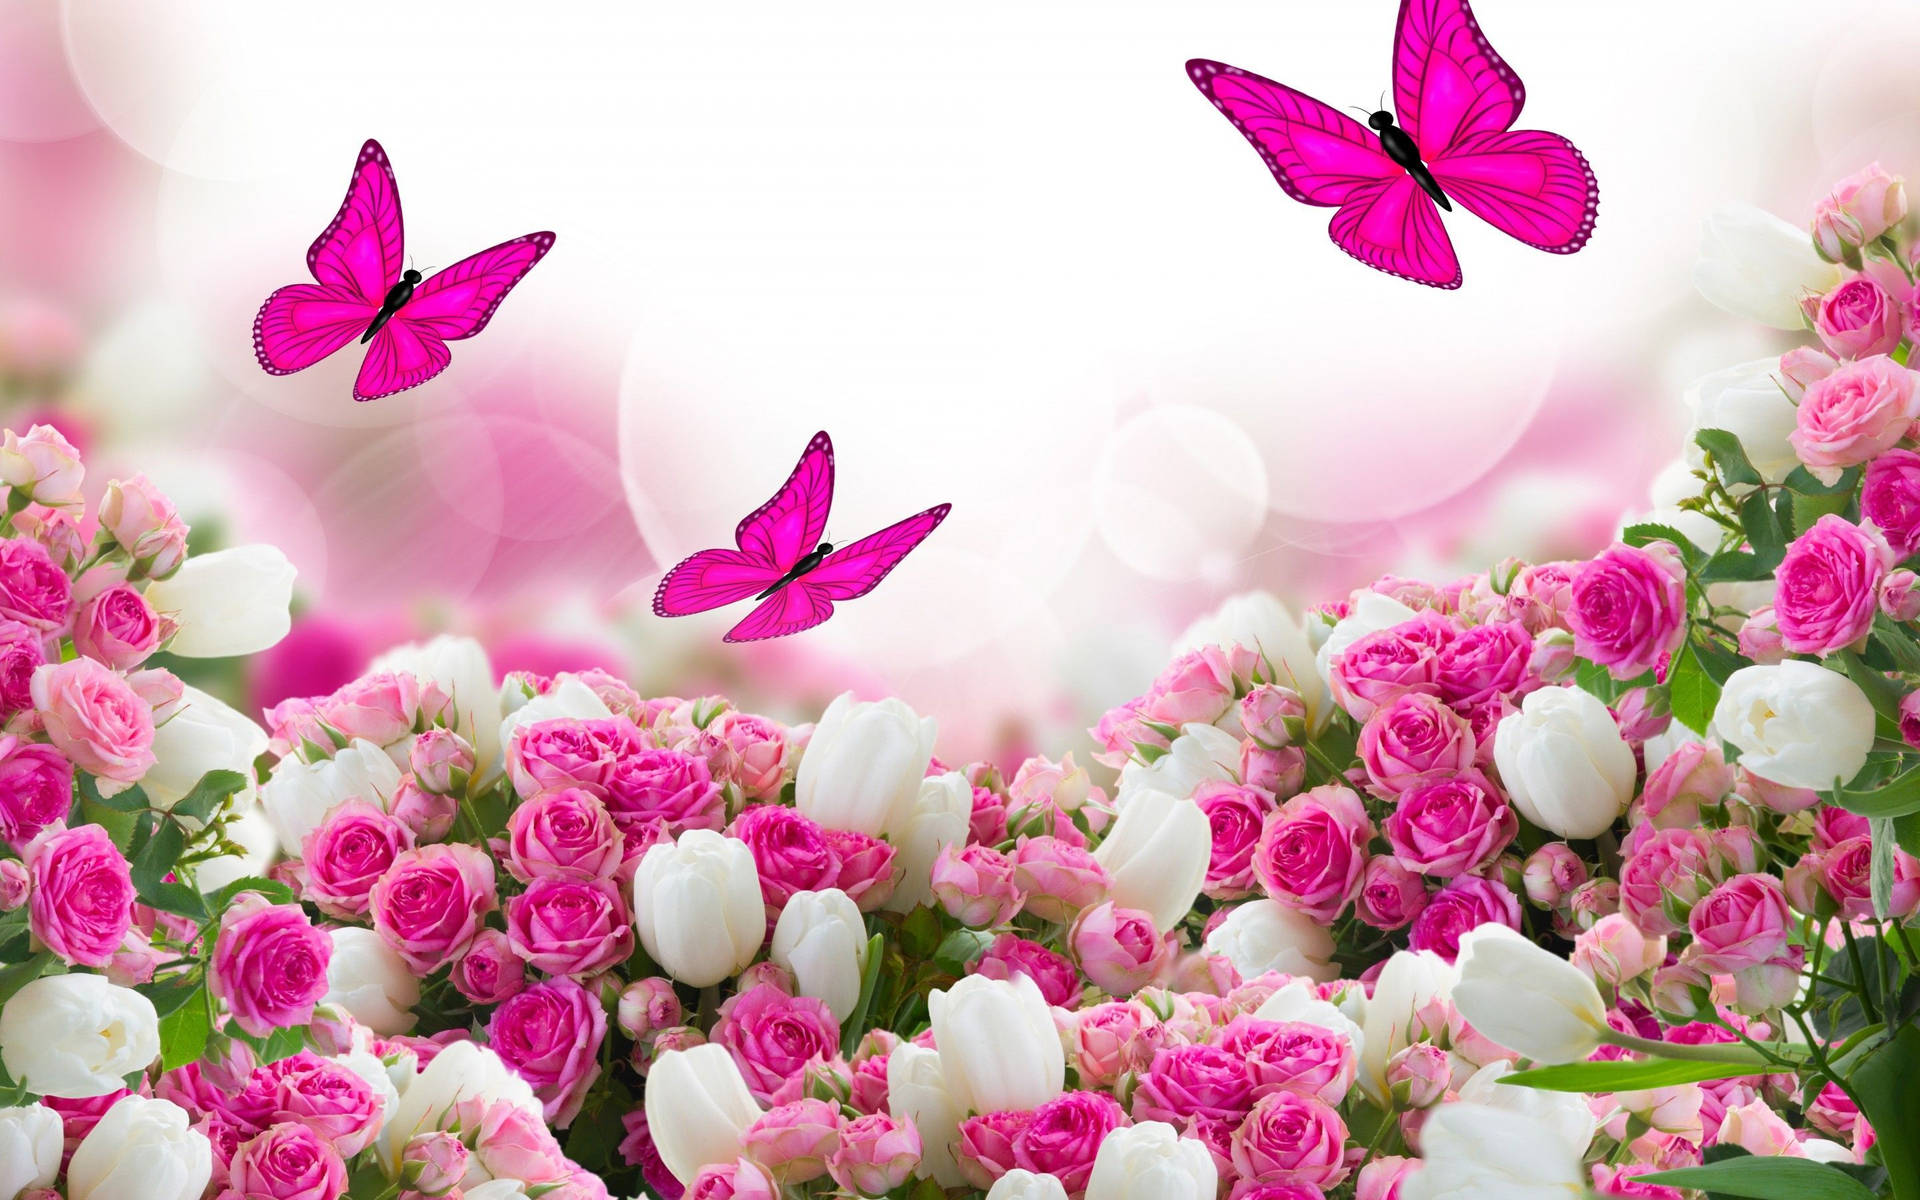 A Crowd Of Pink Roses And Butterflies Wallpaper